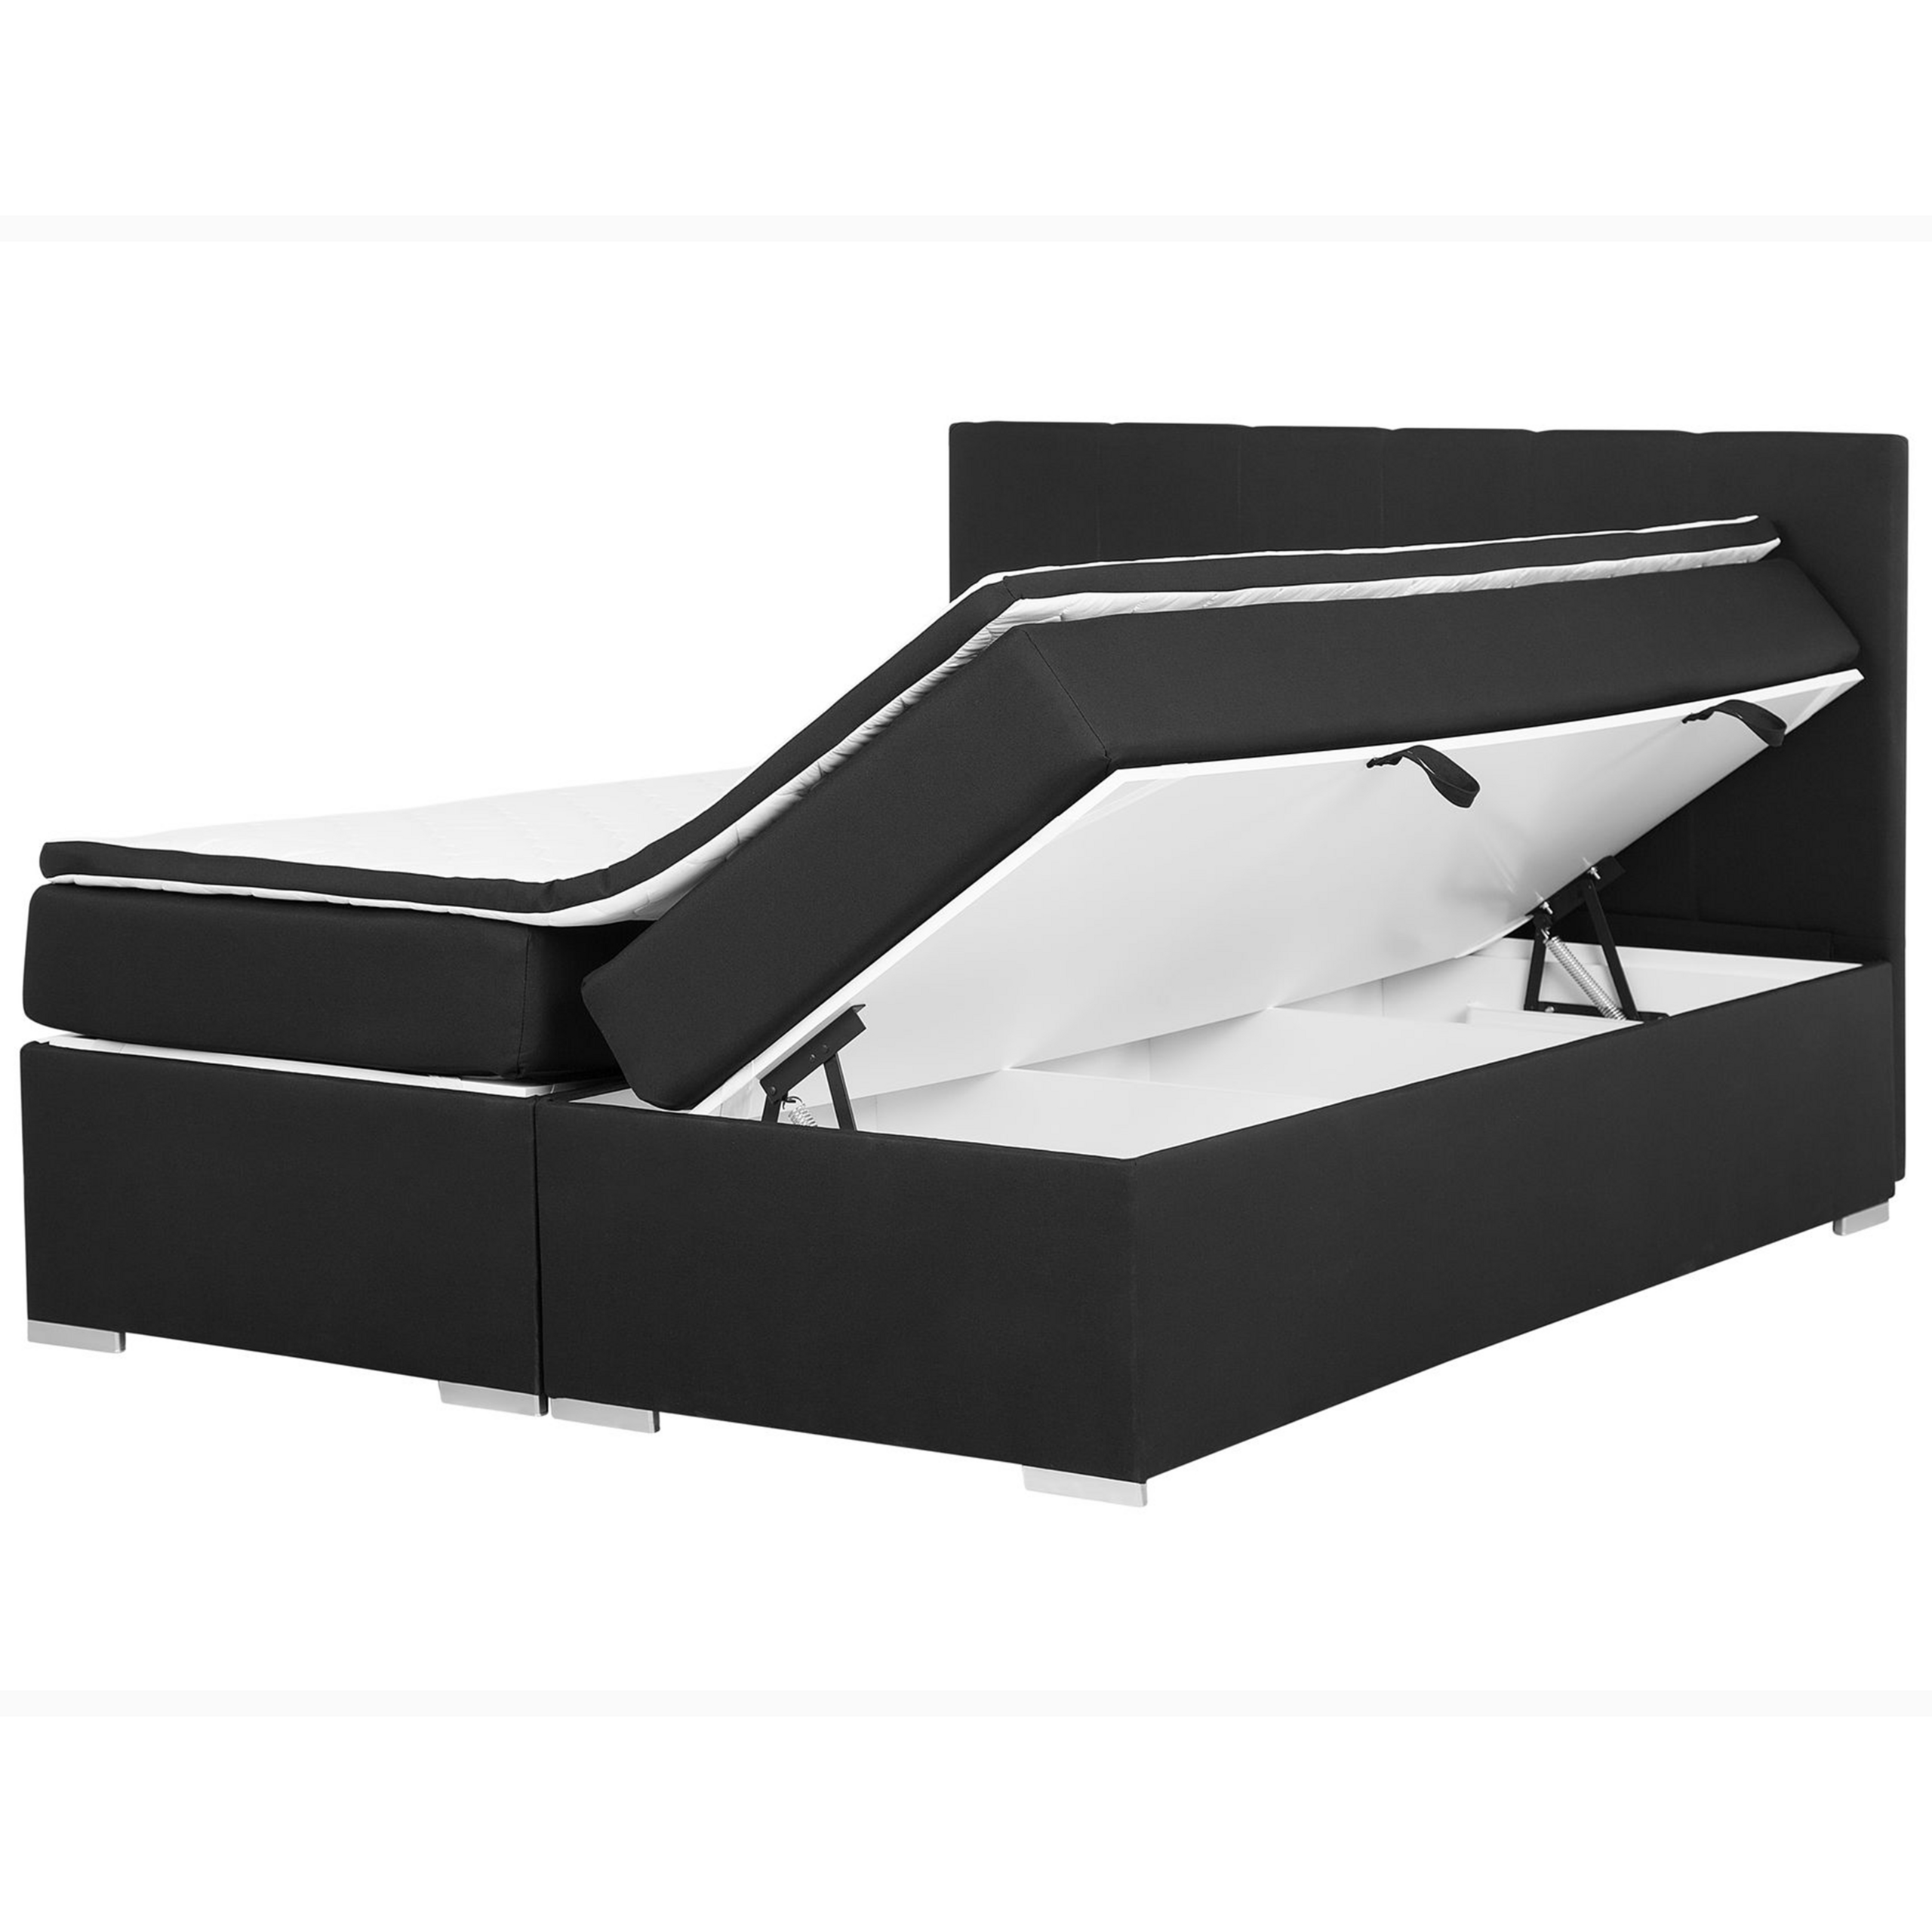 Beliani Divan Bed Black Fabric Upholstery EU King Size 5ft3 Continental with Storage Boxes Pocket Spring Mattresses Headboard